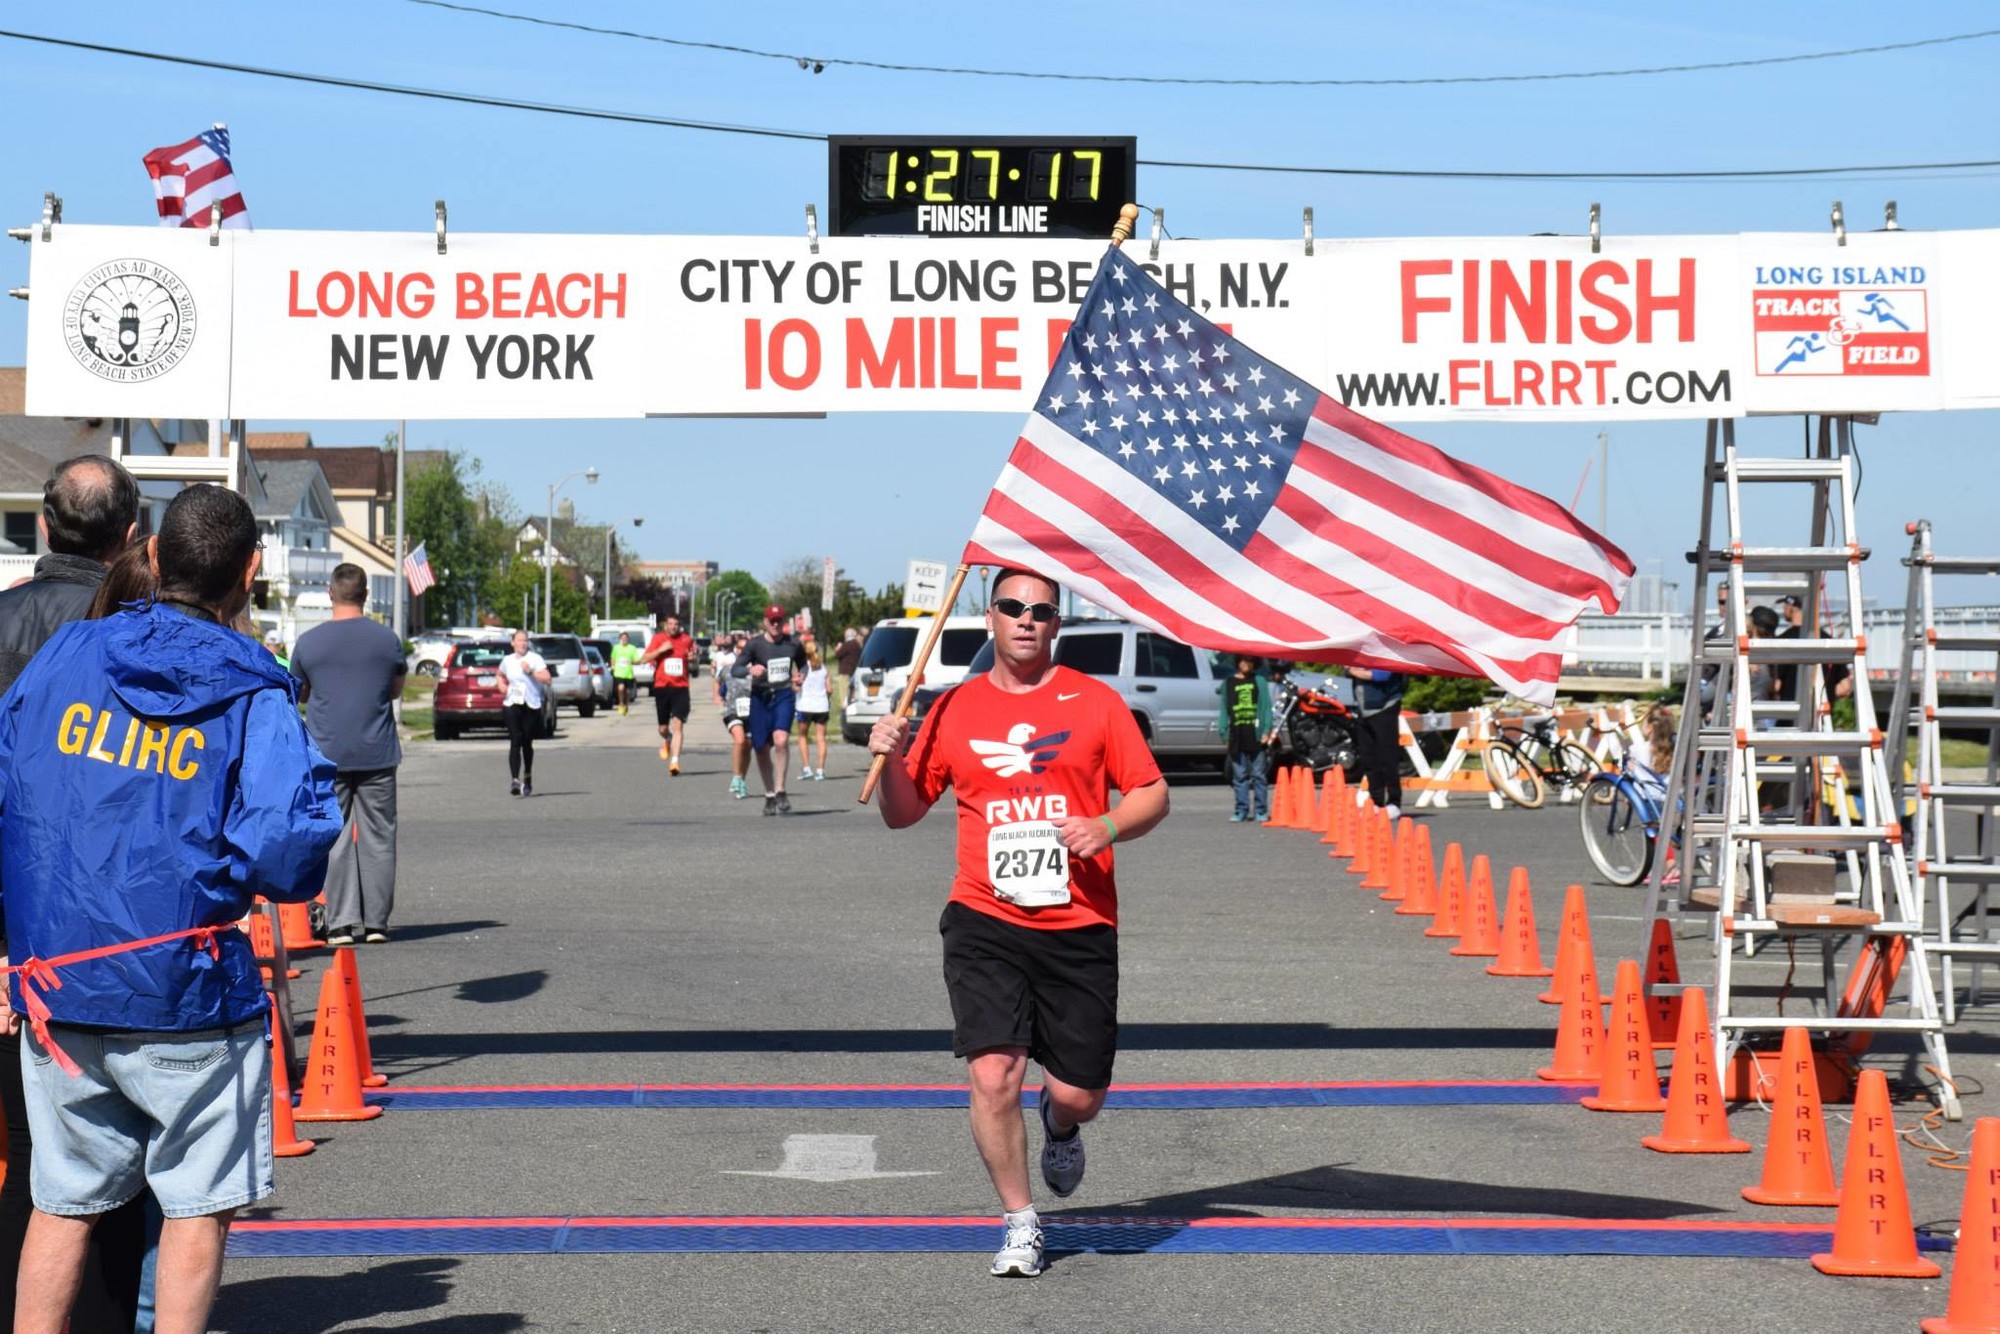 Keith Grant, founder of 1156Run and a veteran, crossed the finish line carrying an American Flag.